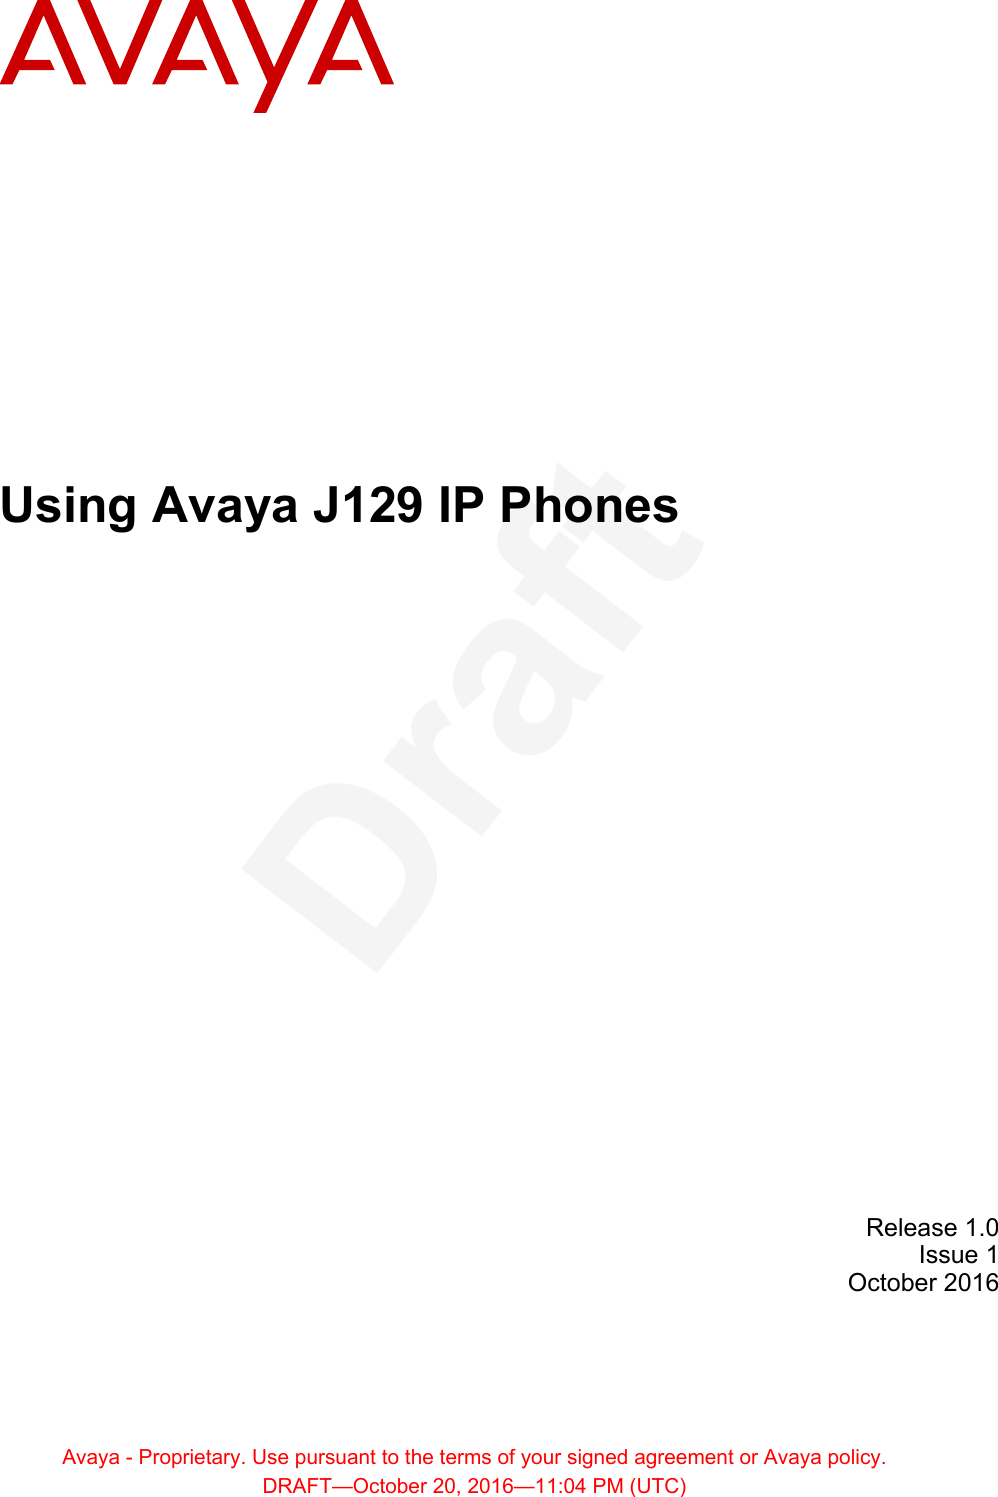 Using Avaya J129 IP PhonesRelease 1.0Issue 1October 2016Avaya - Proprietary. Use pursuant to the terms of your signed agreement or Avaya policy.DRAFT—October 20, 2016—11:04 PM (UTC)